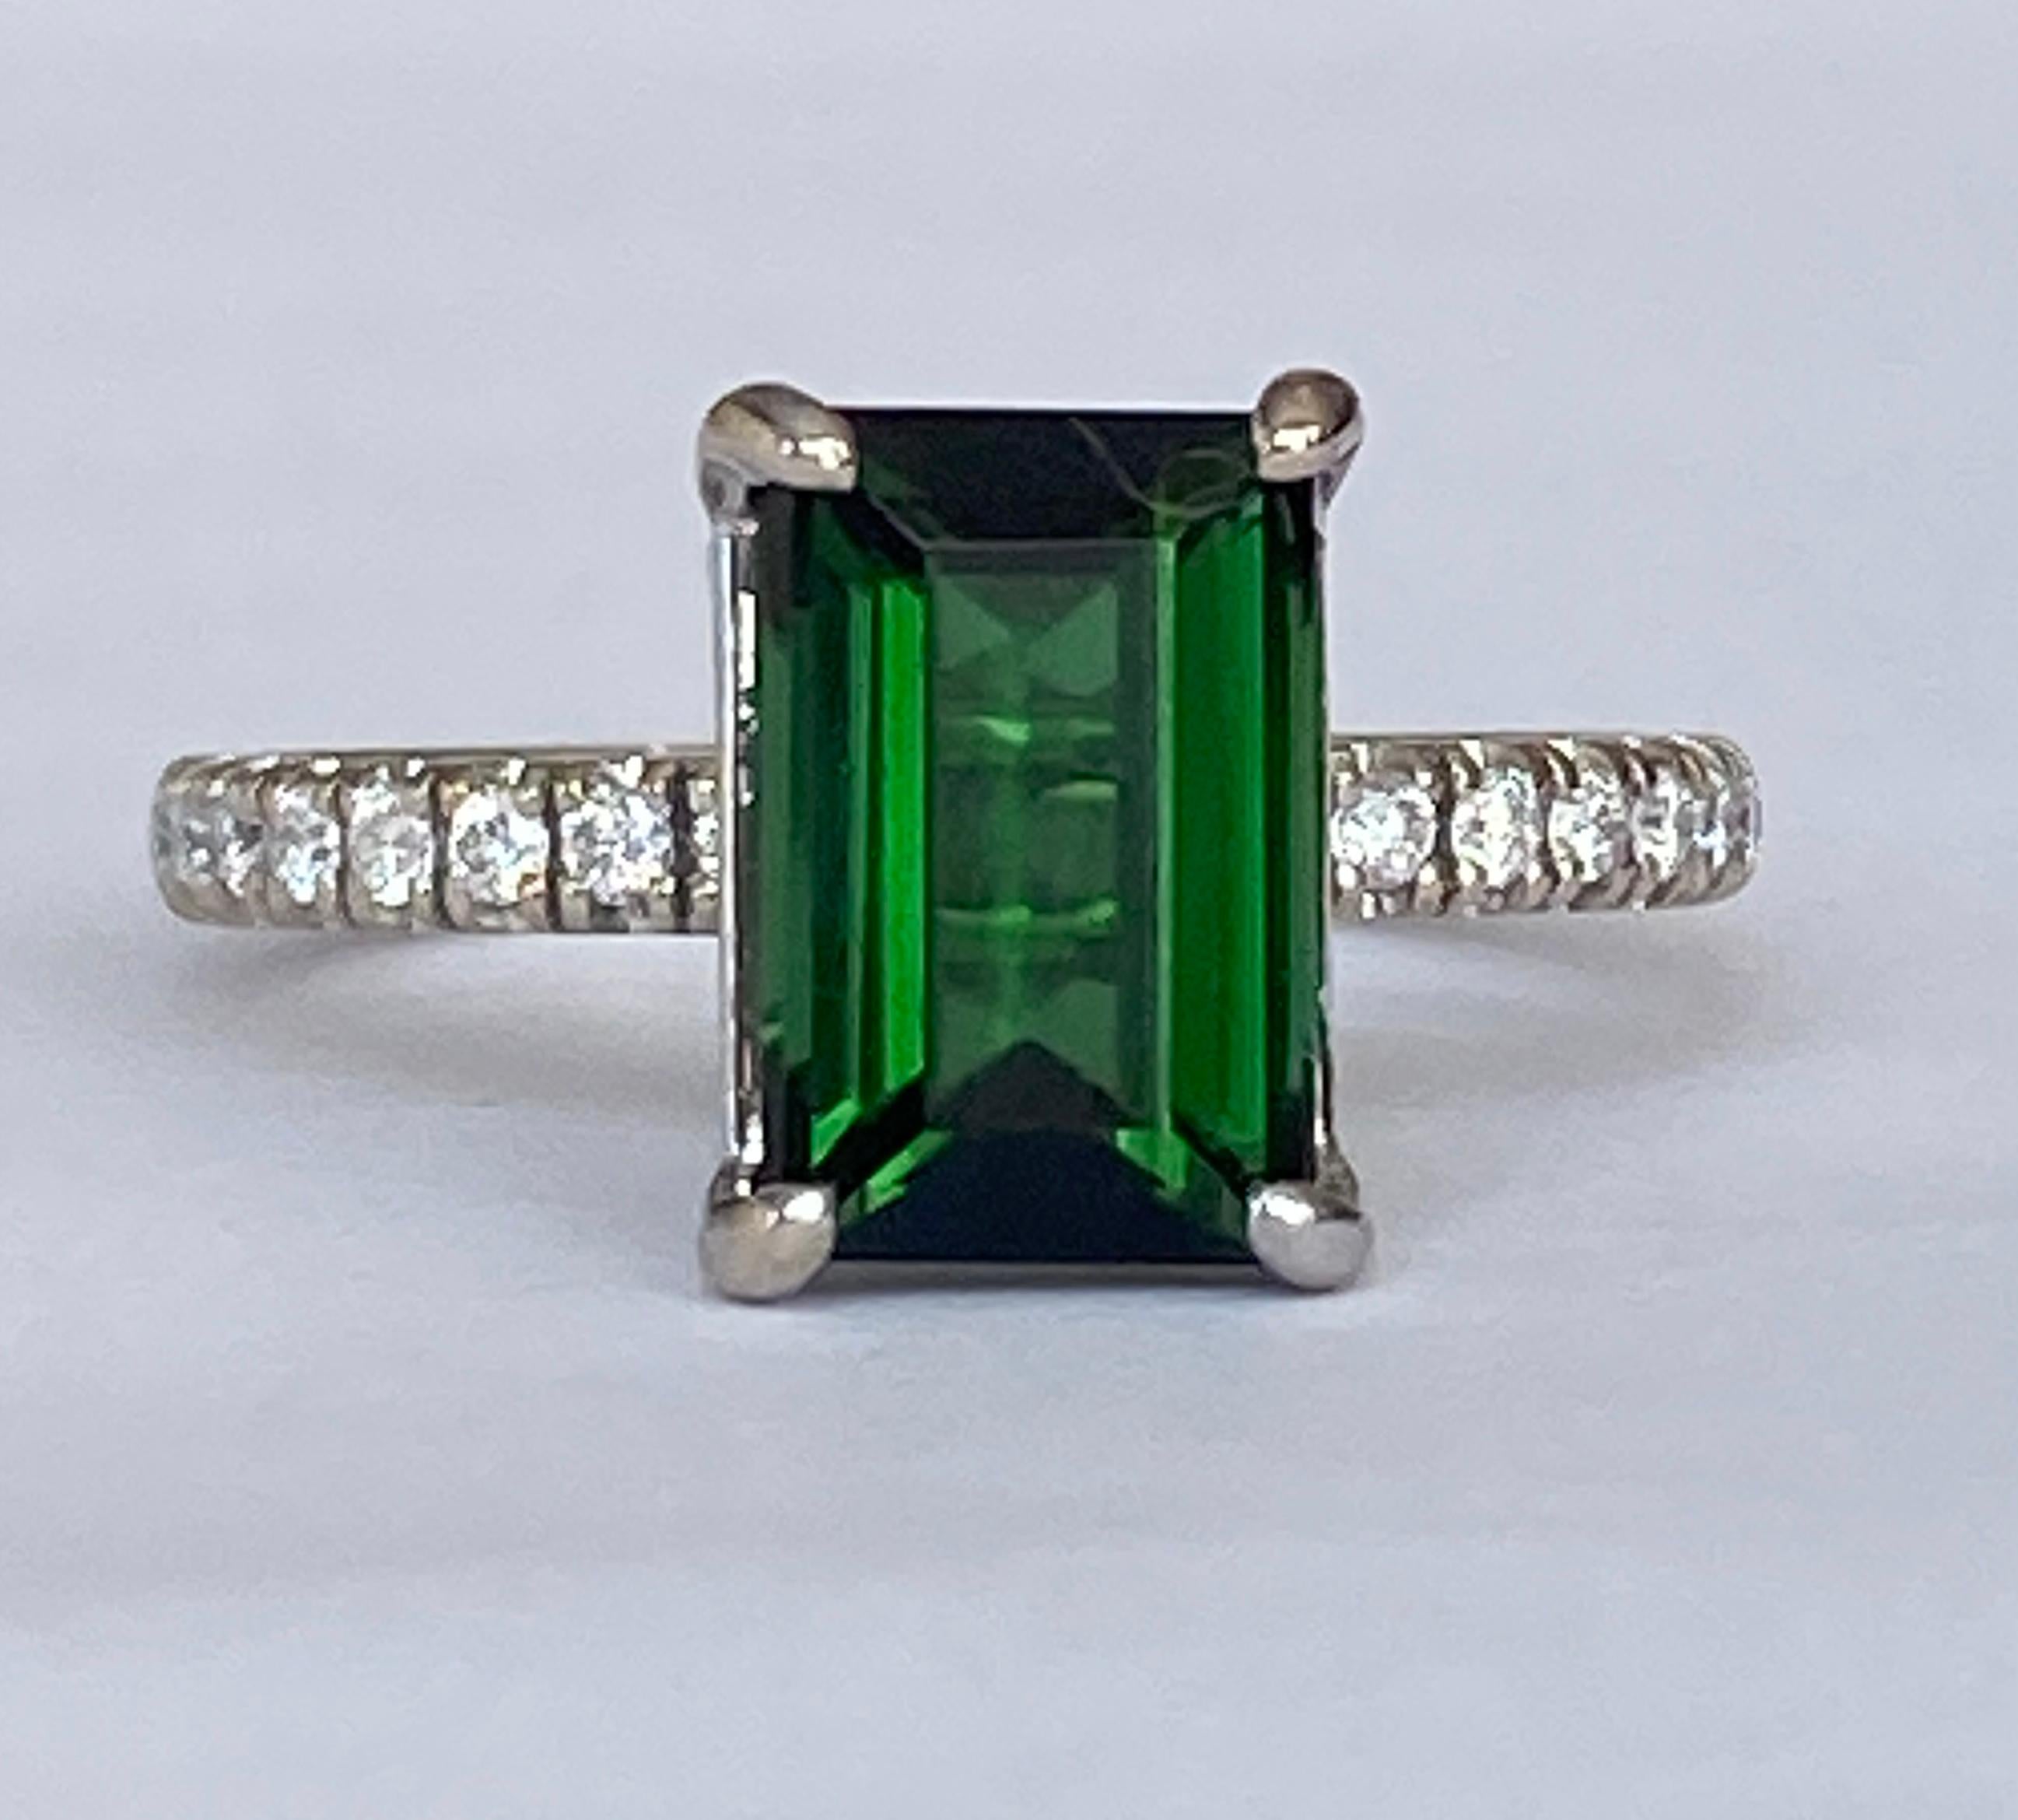 Offered: 18 kt white gold ladies ring with an emerald cut tourmaline (beautiful colour) 2.47 ct, decorated on the side with 16 brilliant cut diamonds, approx. 0.25 ct of G/VS quality.
Quality: 750 (approved)
Head size: 10mm*20mm
Natural tourmaline –